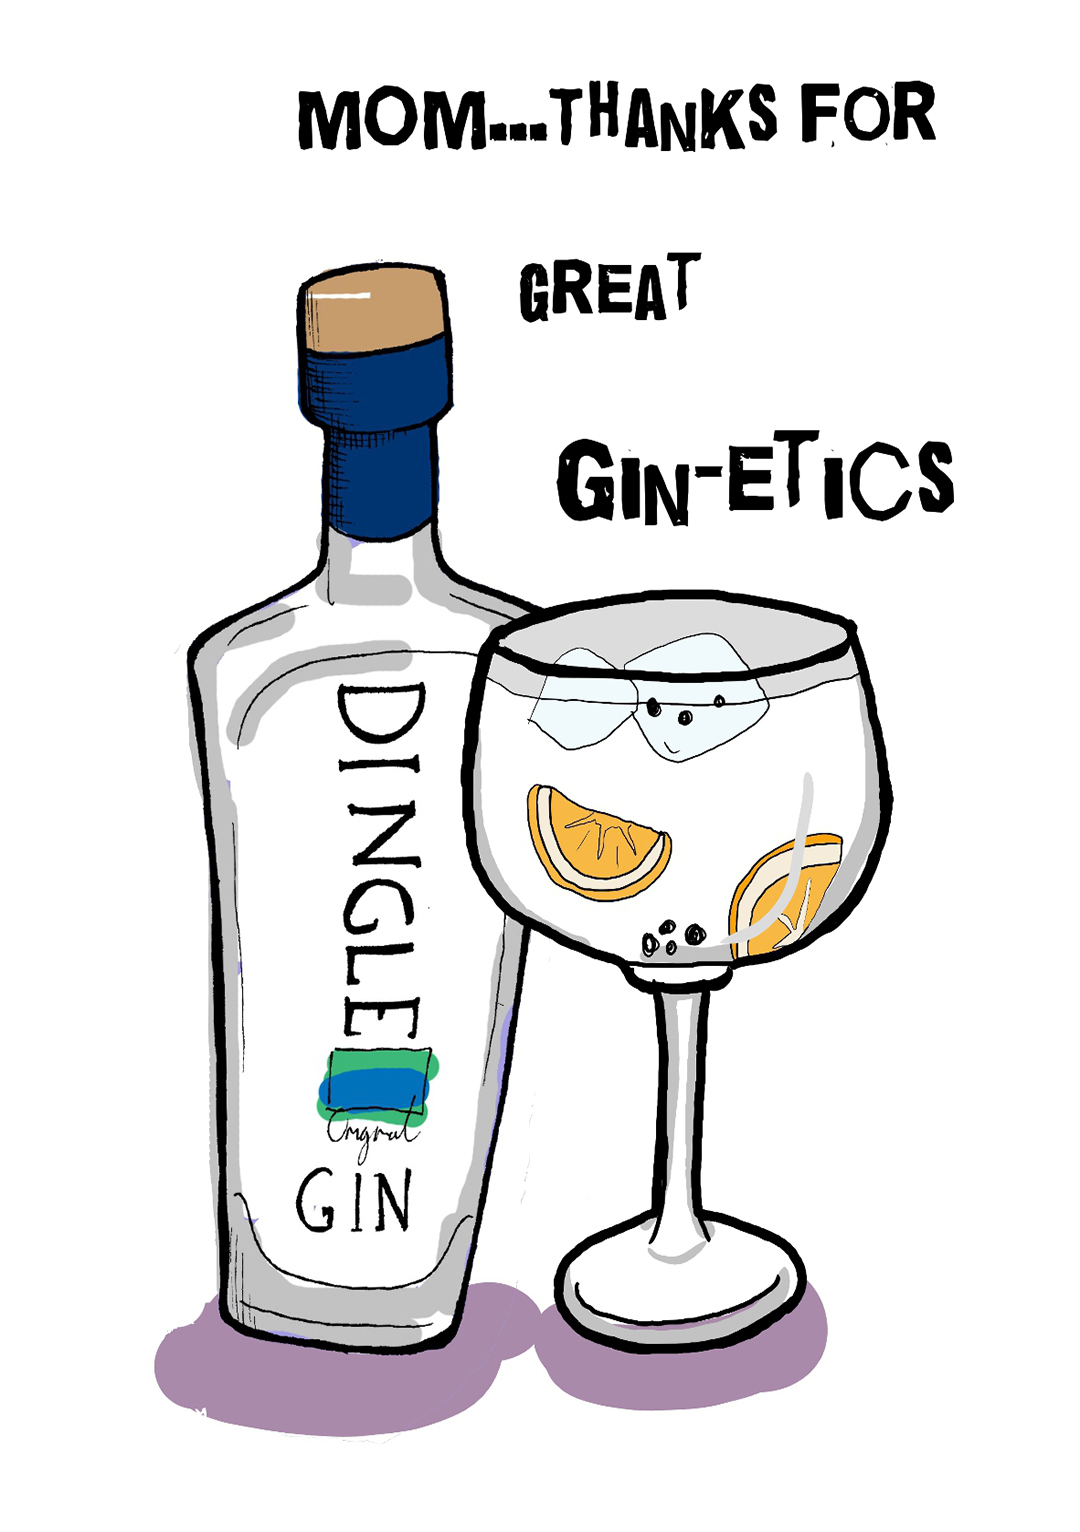 Mom, Thanks For Great GIN-etics Mother's Day Card